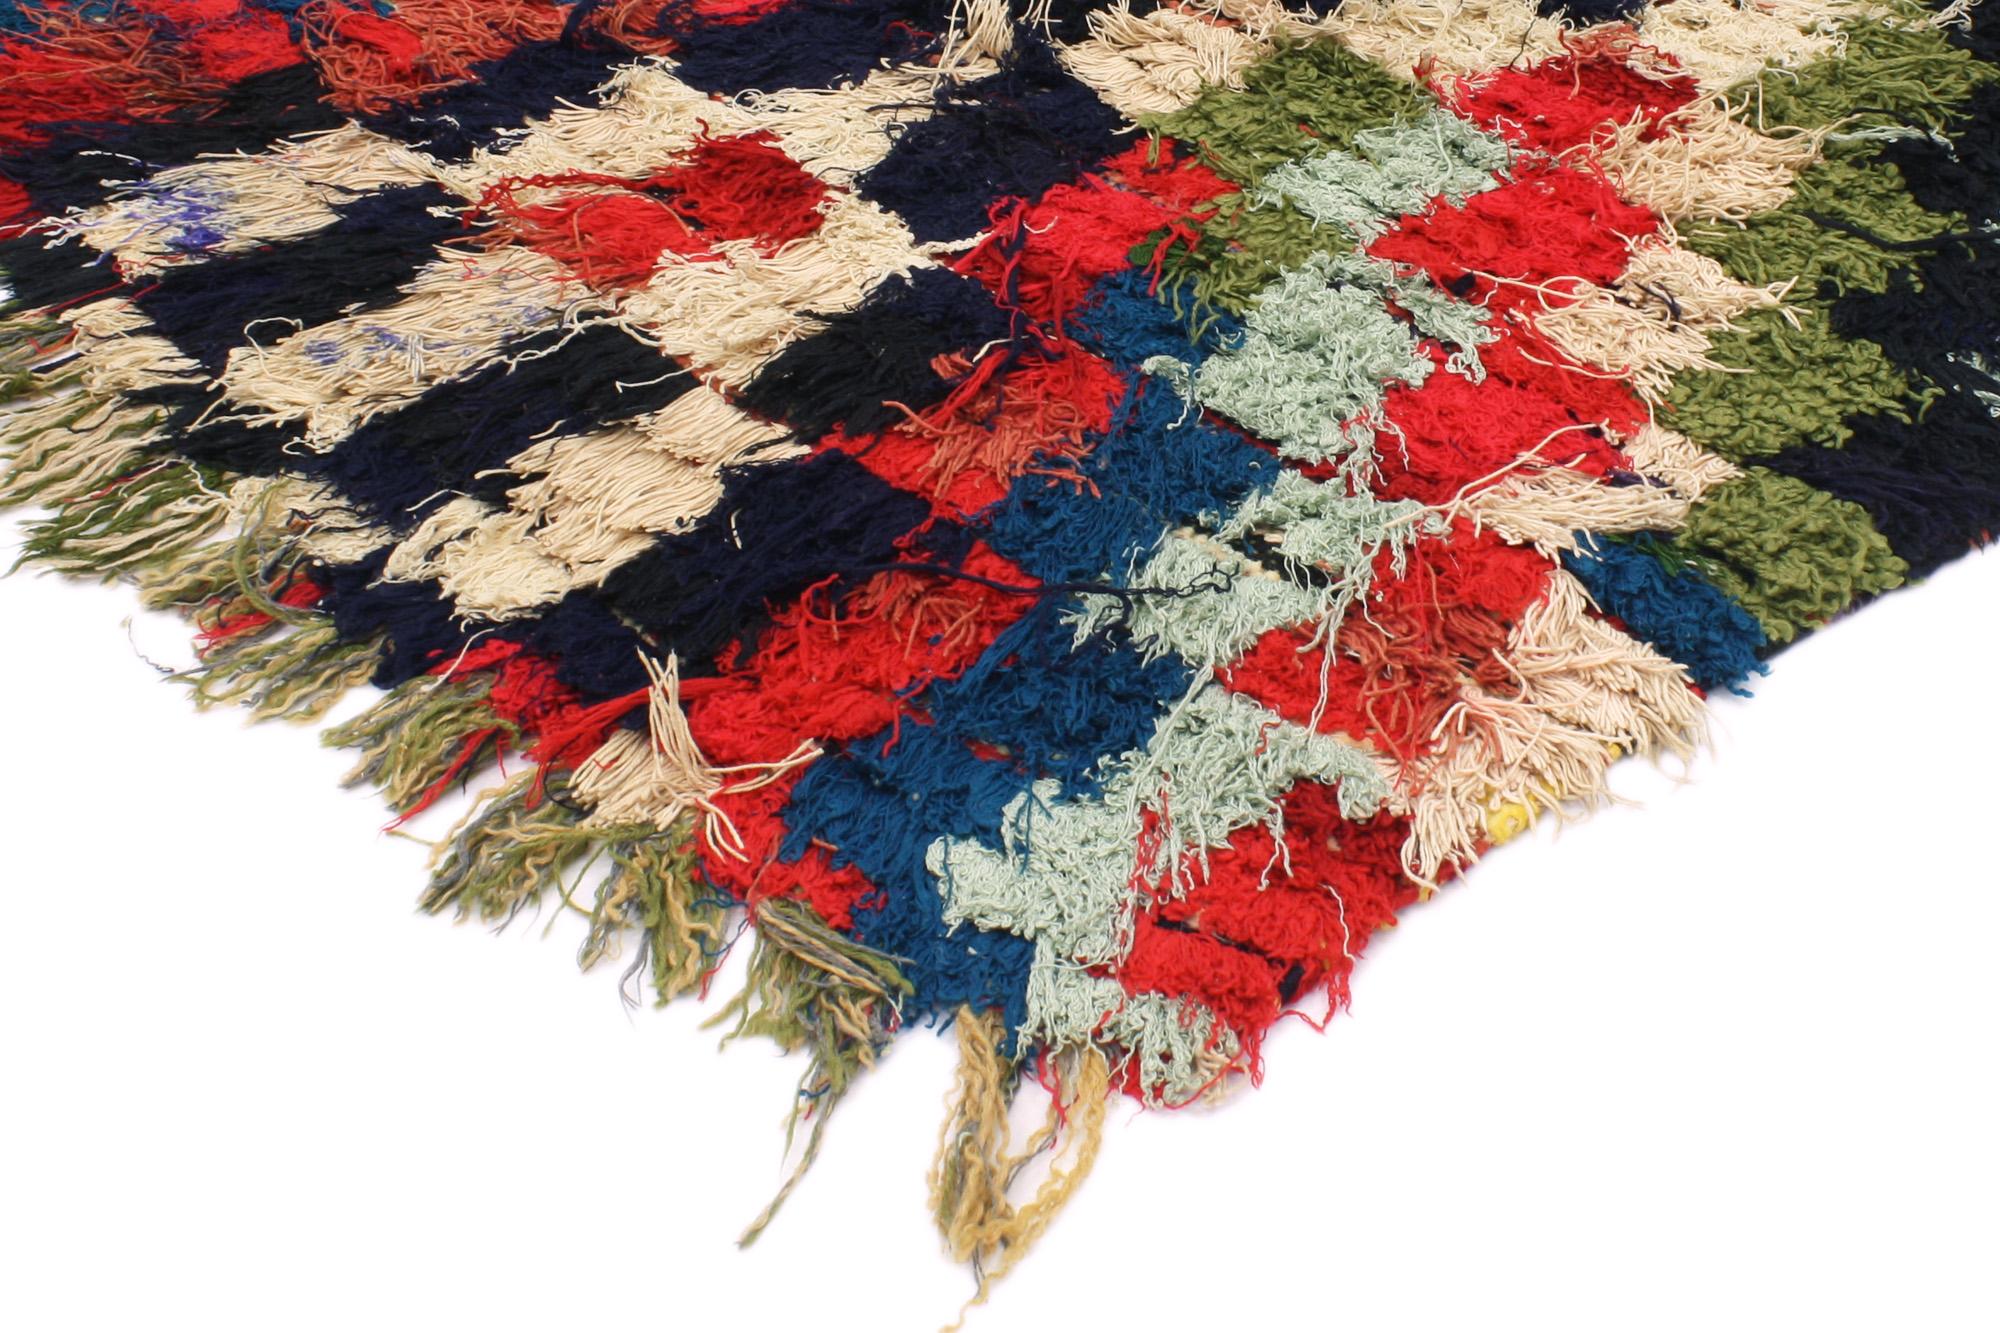 20381 Vintage Checkered Moroccan Rag Rug 03'00 x 08'03. Boucherouite rugs represent a cherished tradition of Moroccan craftsmanship, handwoven by Berber women using recycled textiles such as cotton and wool. Emerging from rural communities,